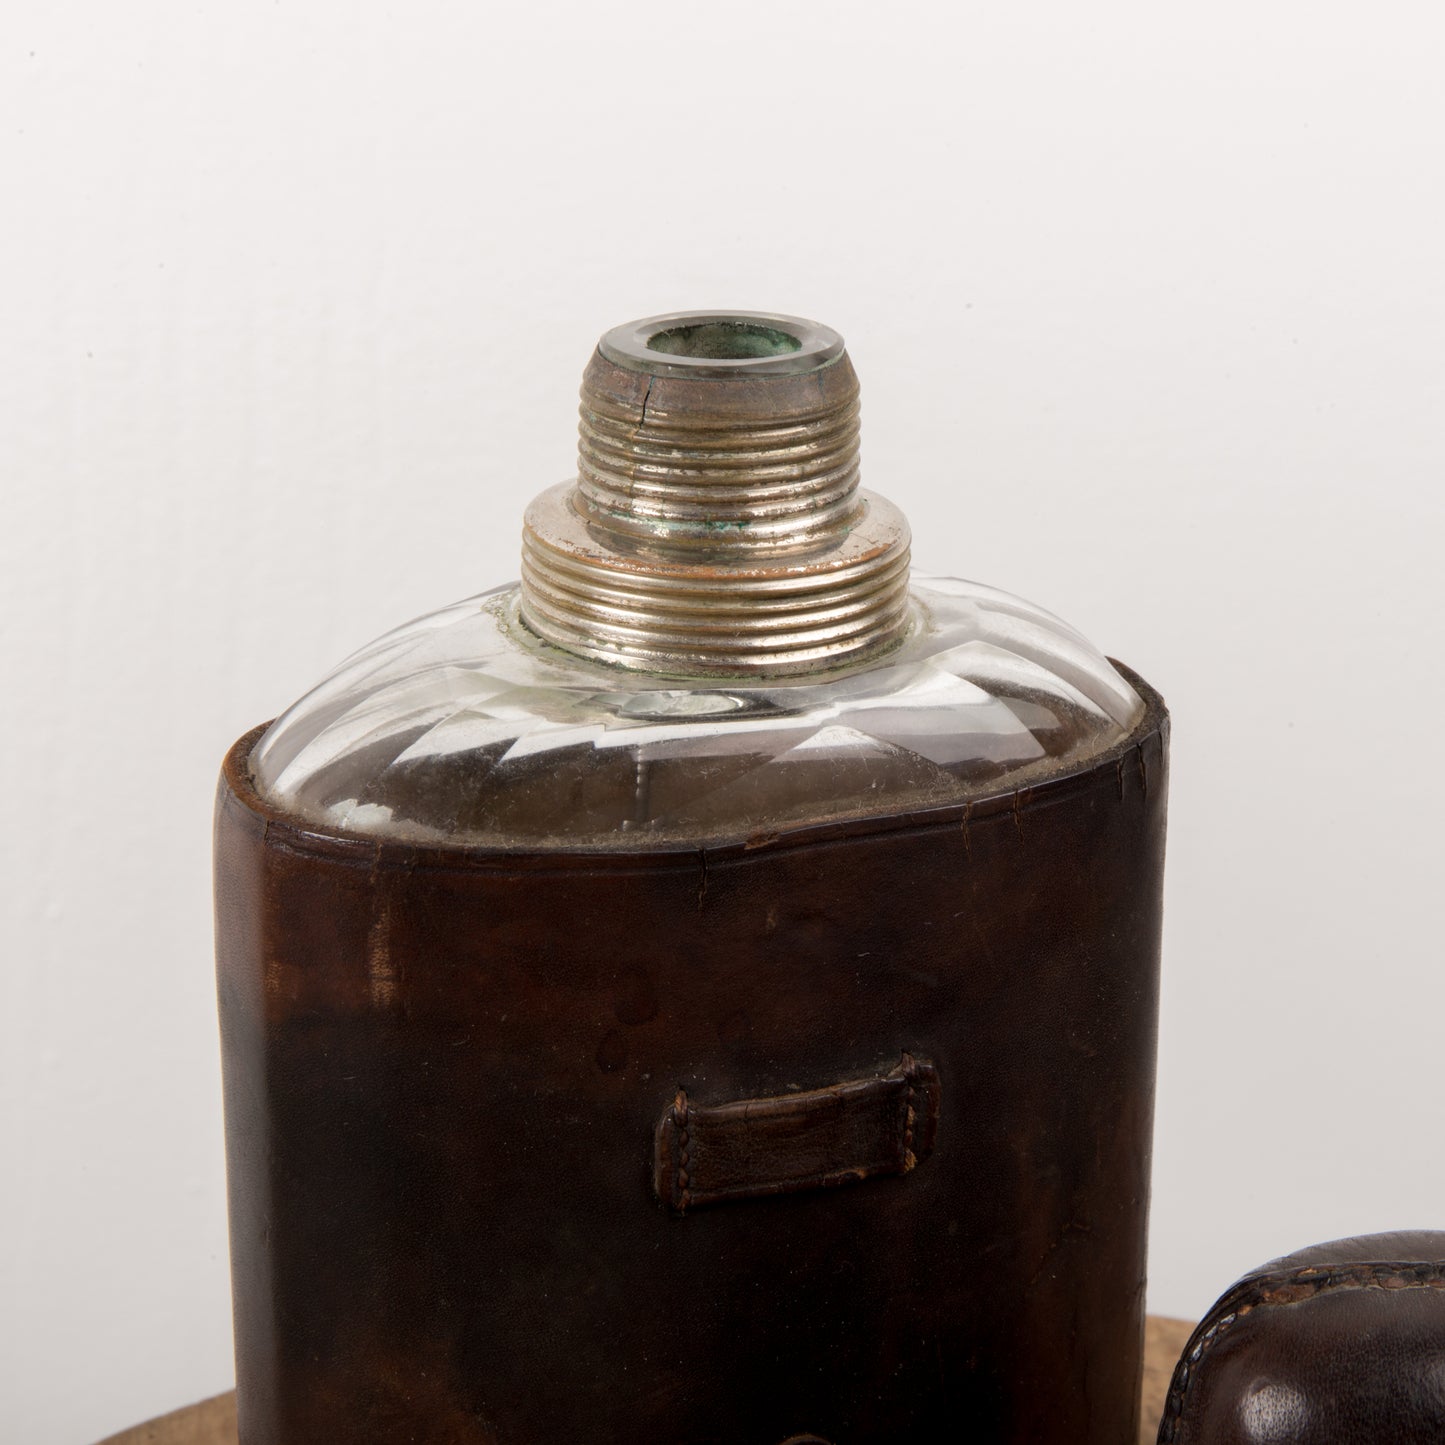 LEATHER & GLASS FLASK  Chrome Cup Original Cork in Pewter Cap Textured Brown Leather Jacket 1920's